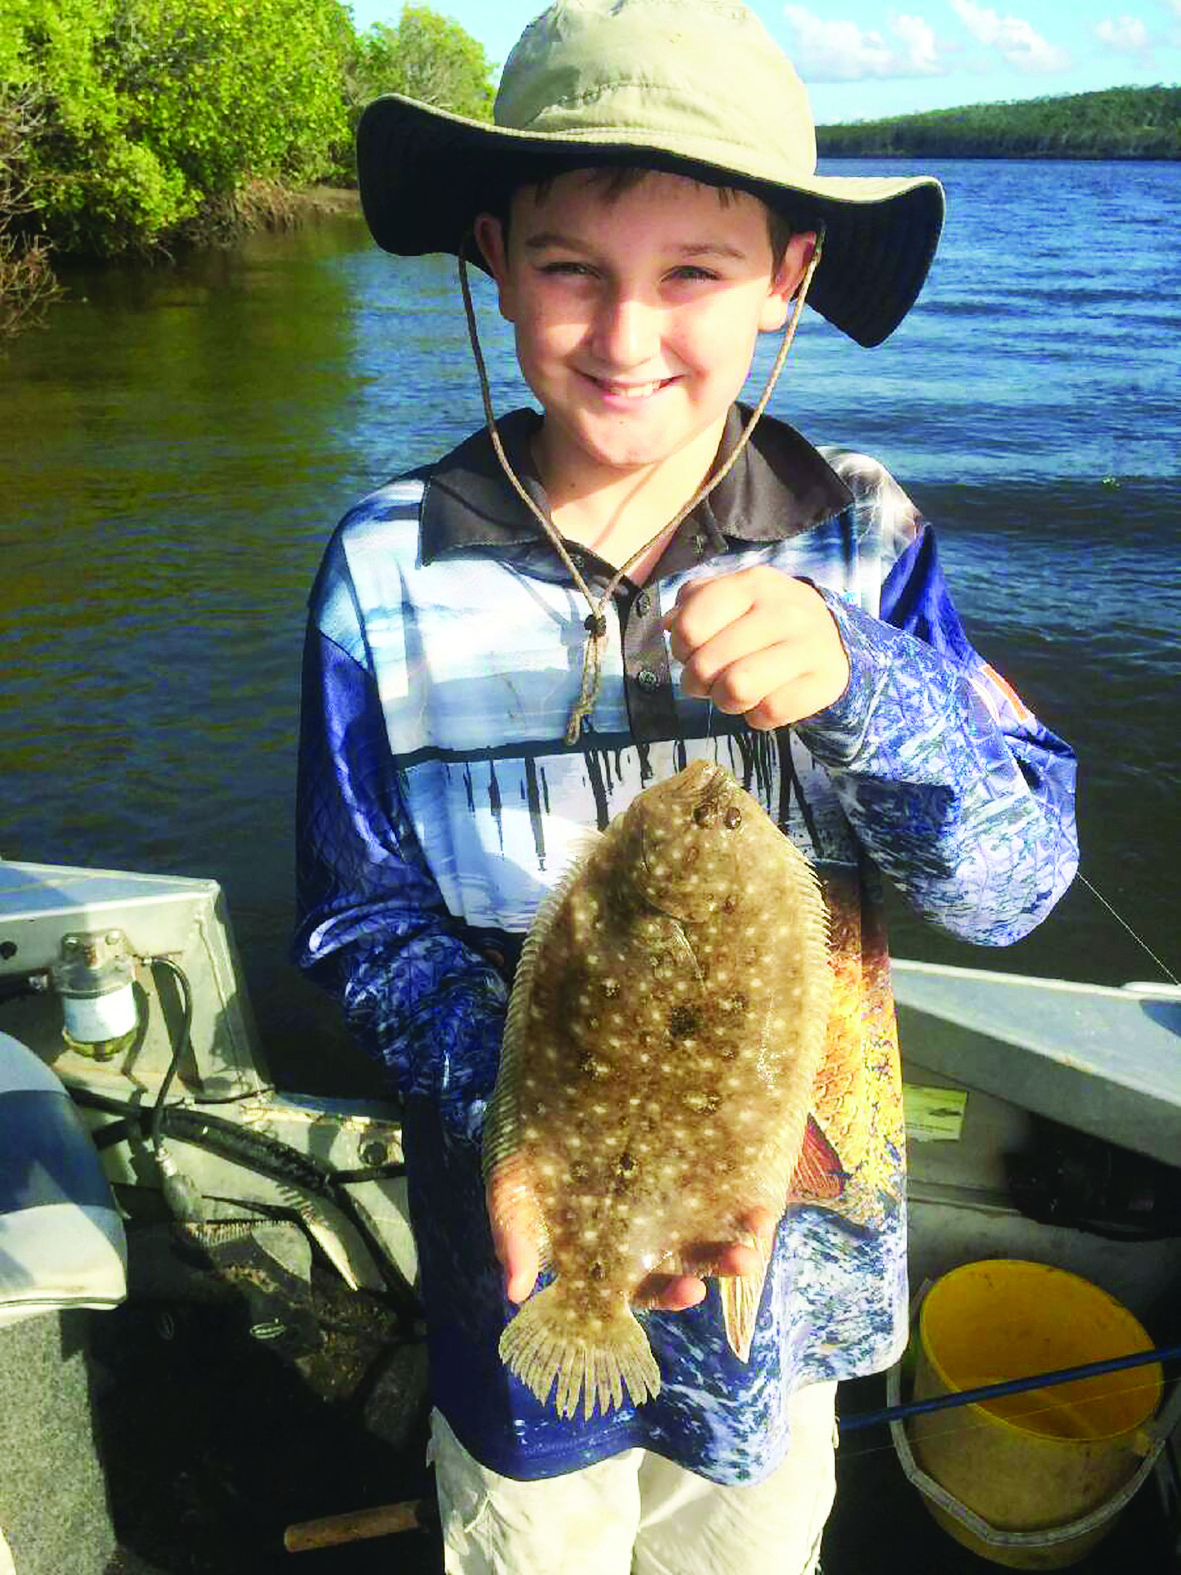 A happy little fisherman. The smile says it all!